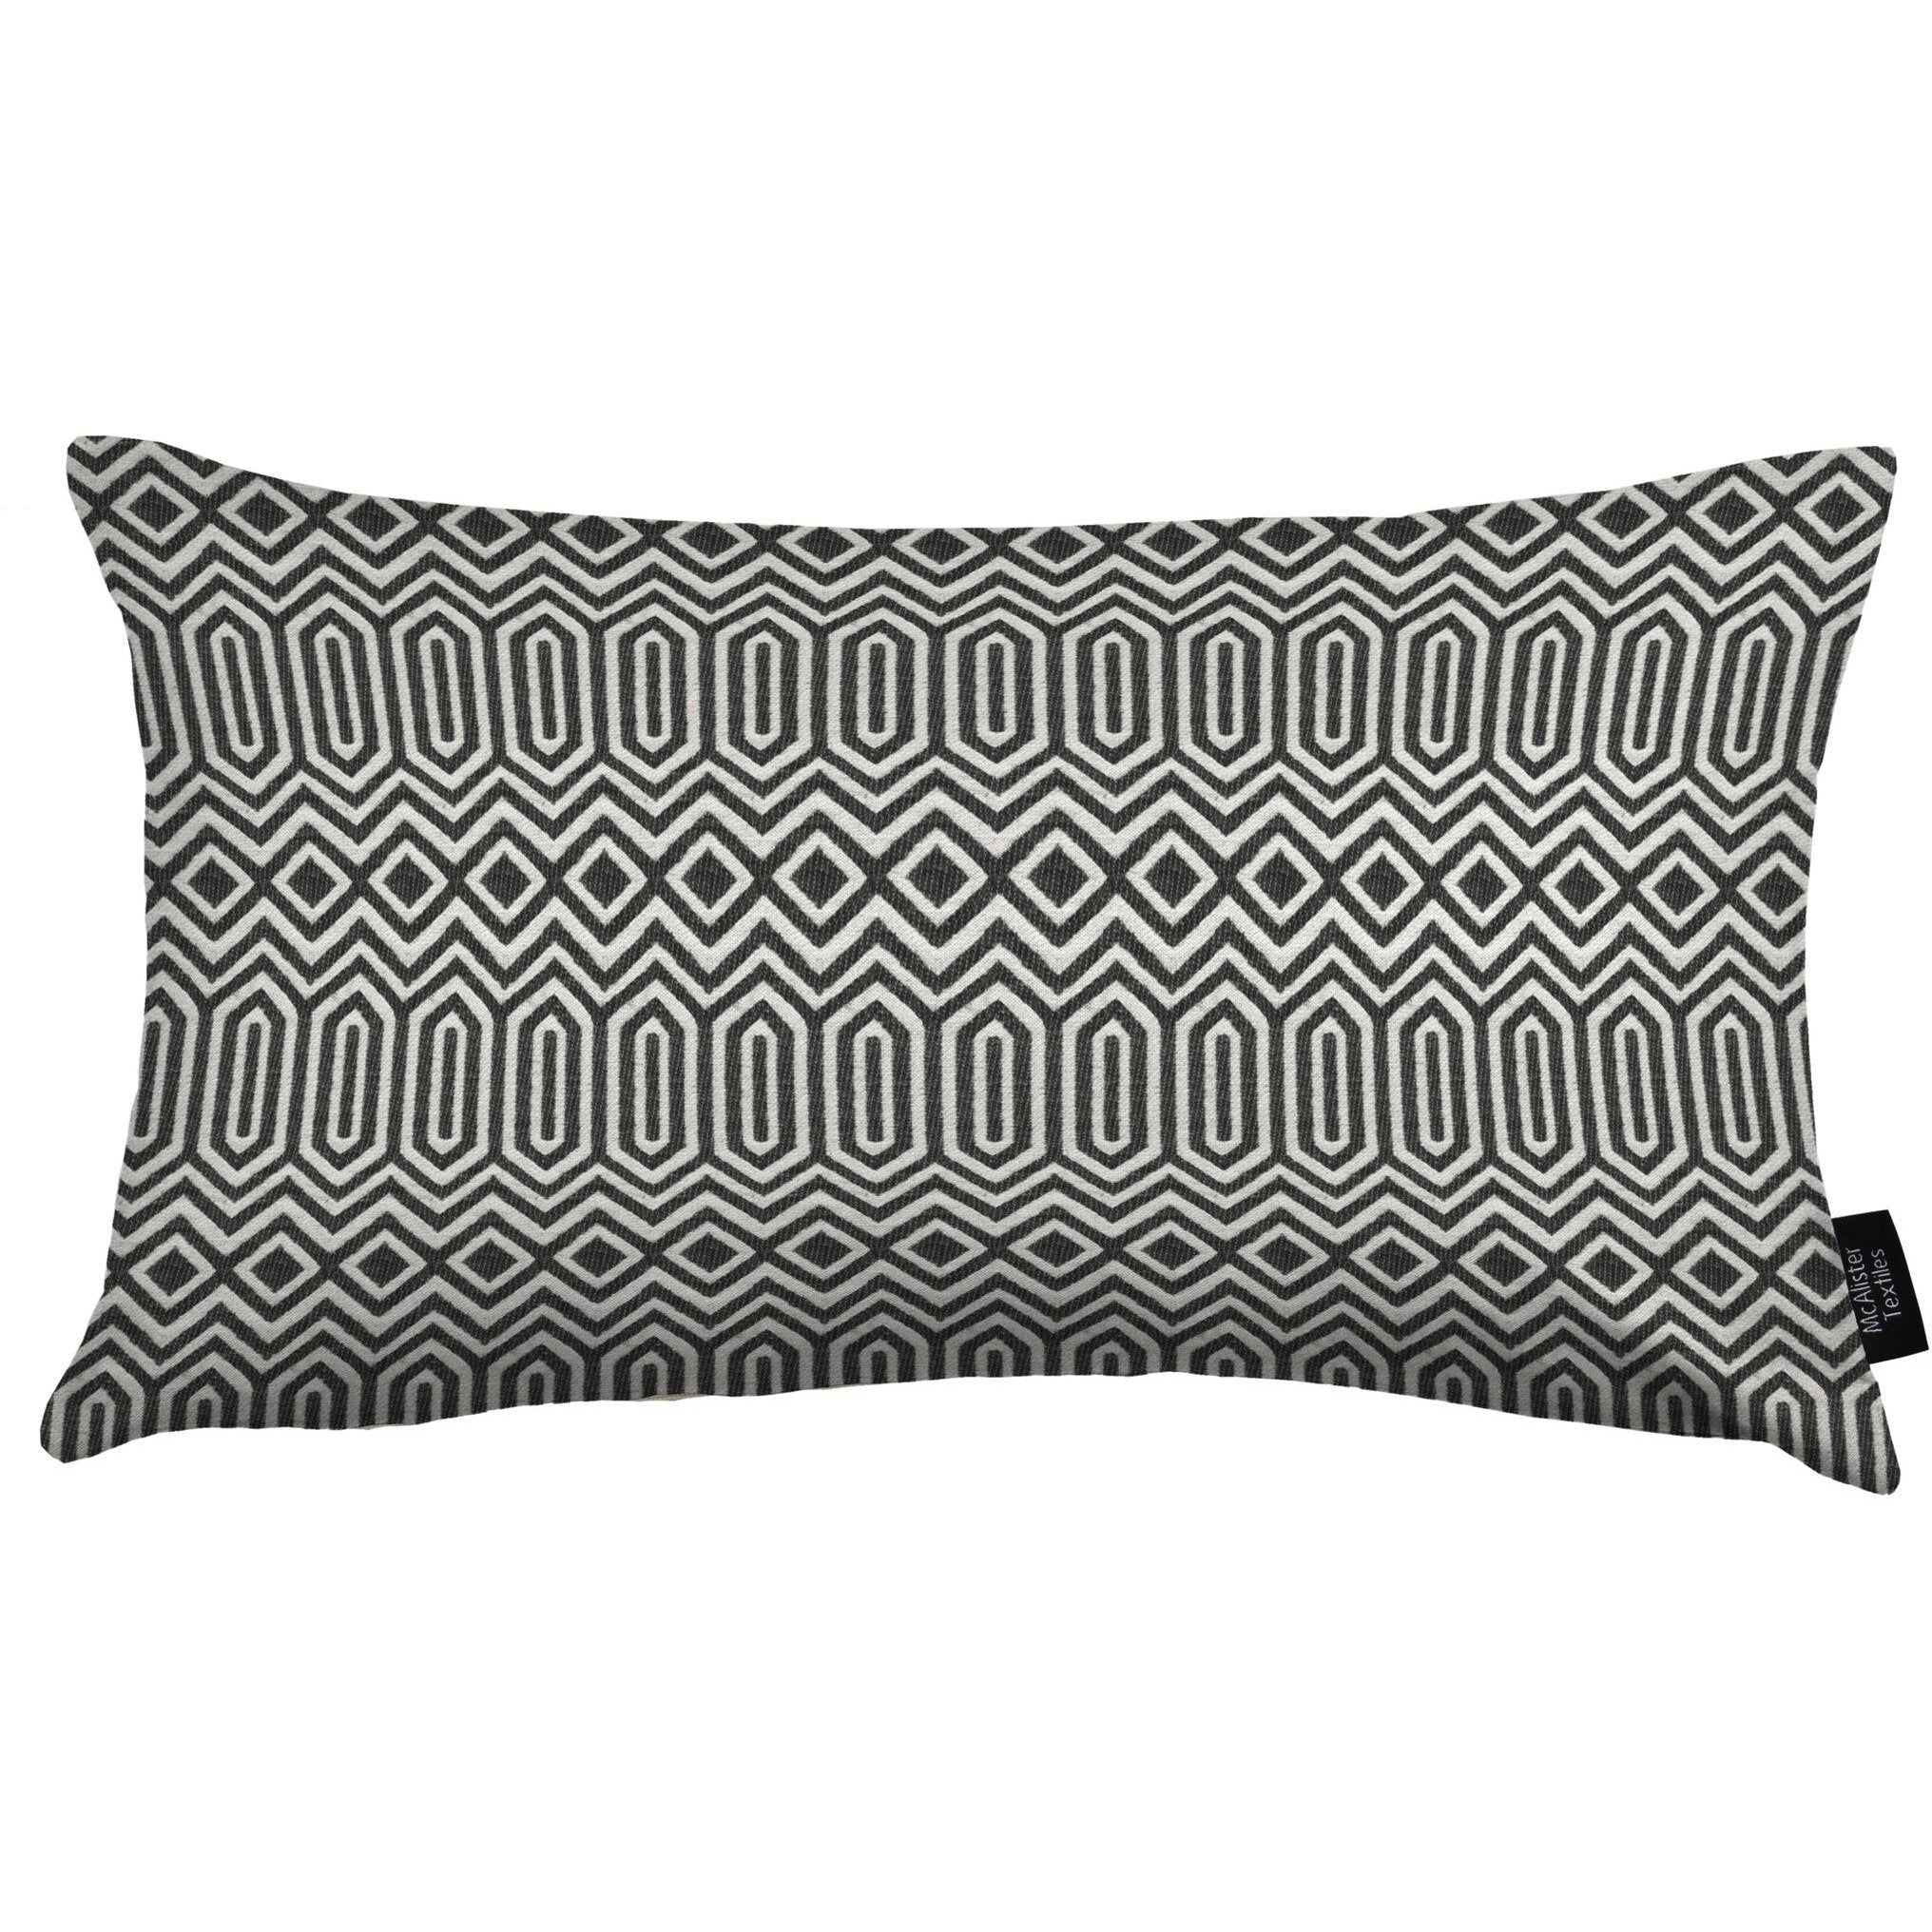 McAlister Textiles Colorado Geometric Black Cushion Cushions and Covers Cover Only 50cm x 30cm 